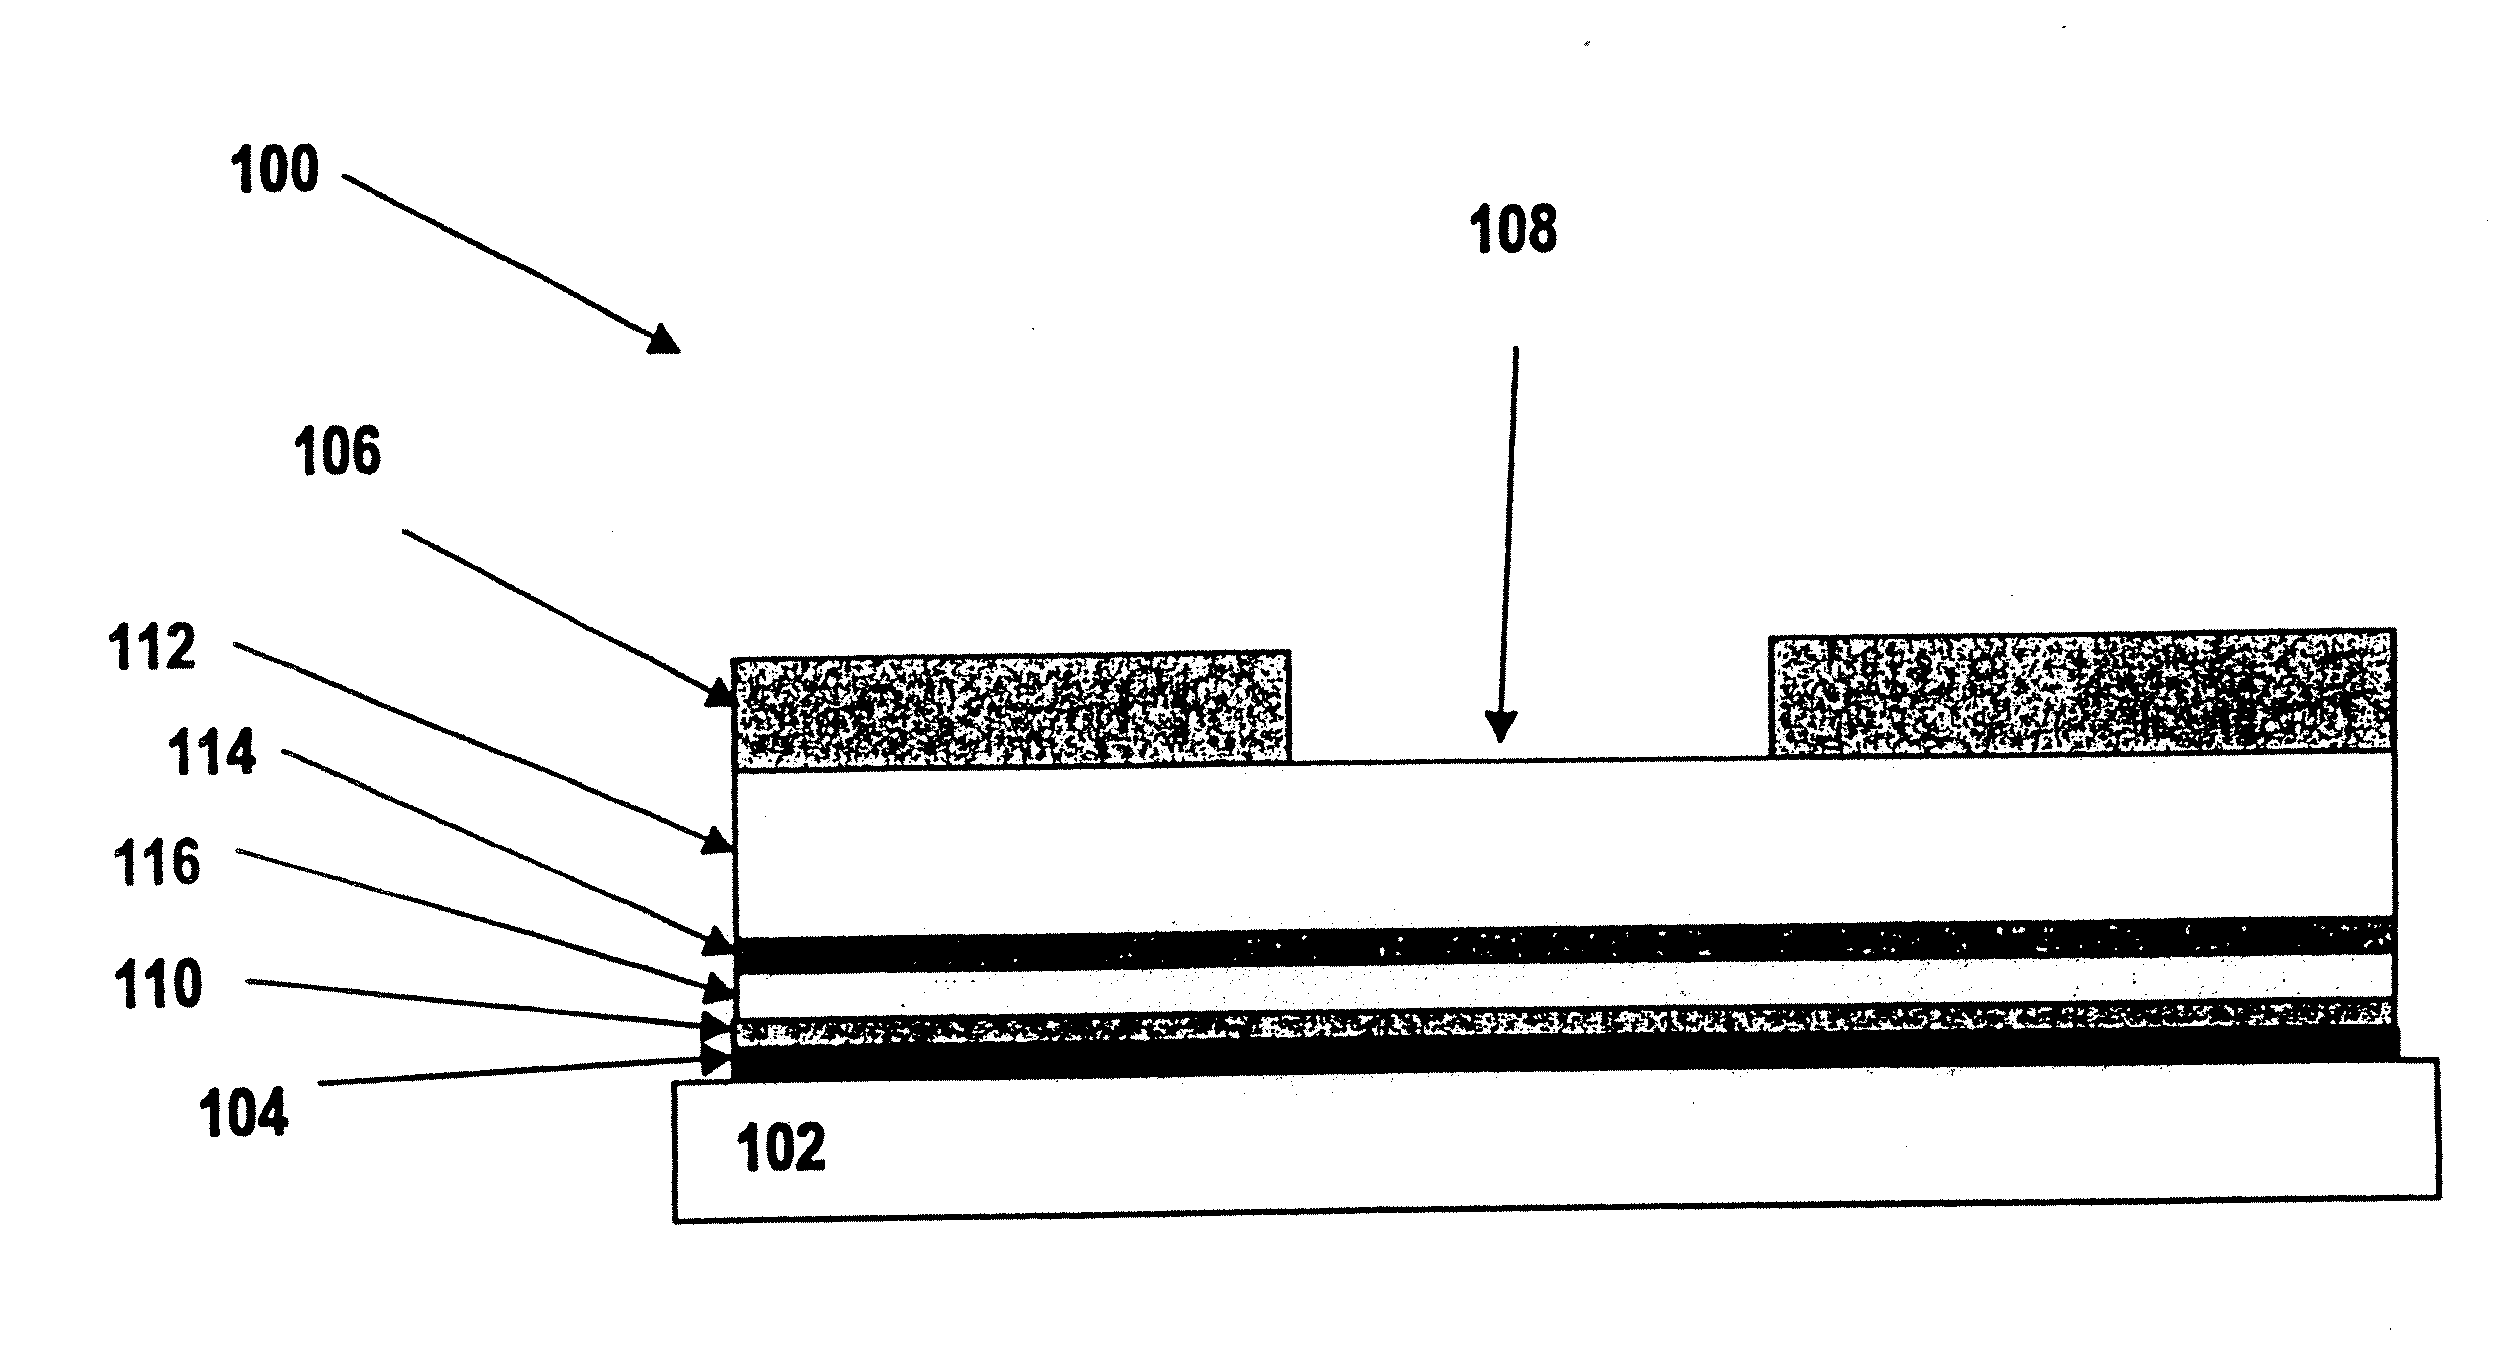 Analyte sensors comprising blended membrane compositions and methods for making and using them